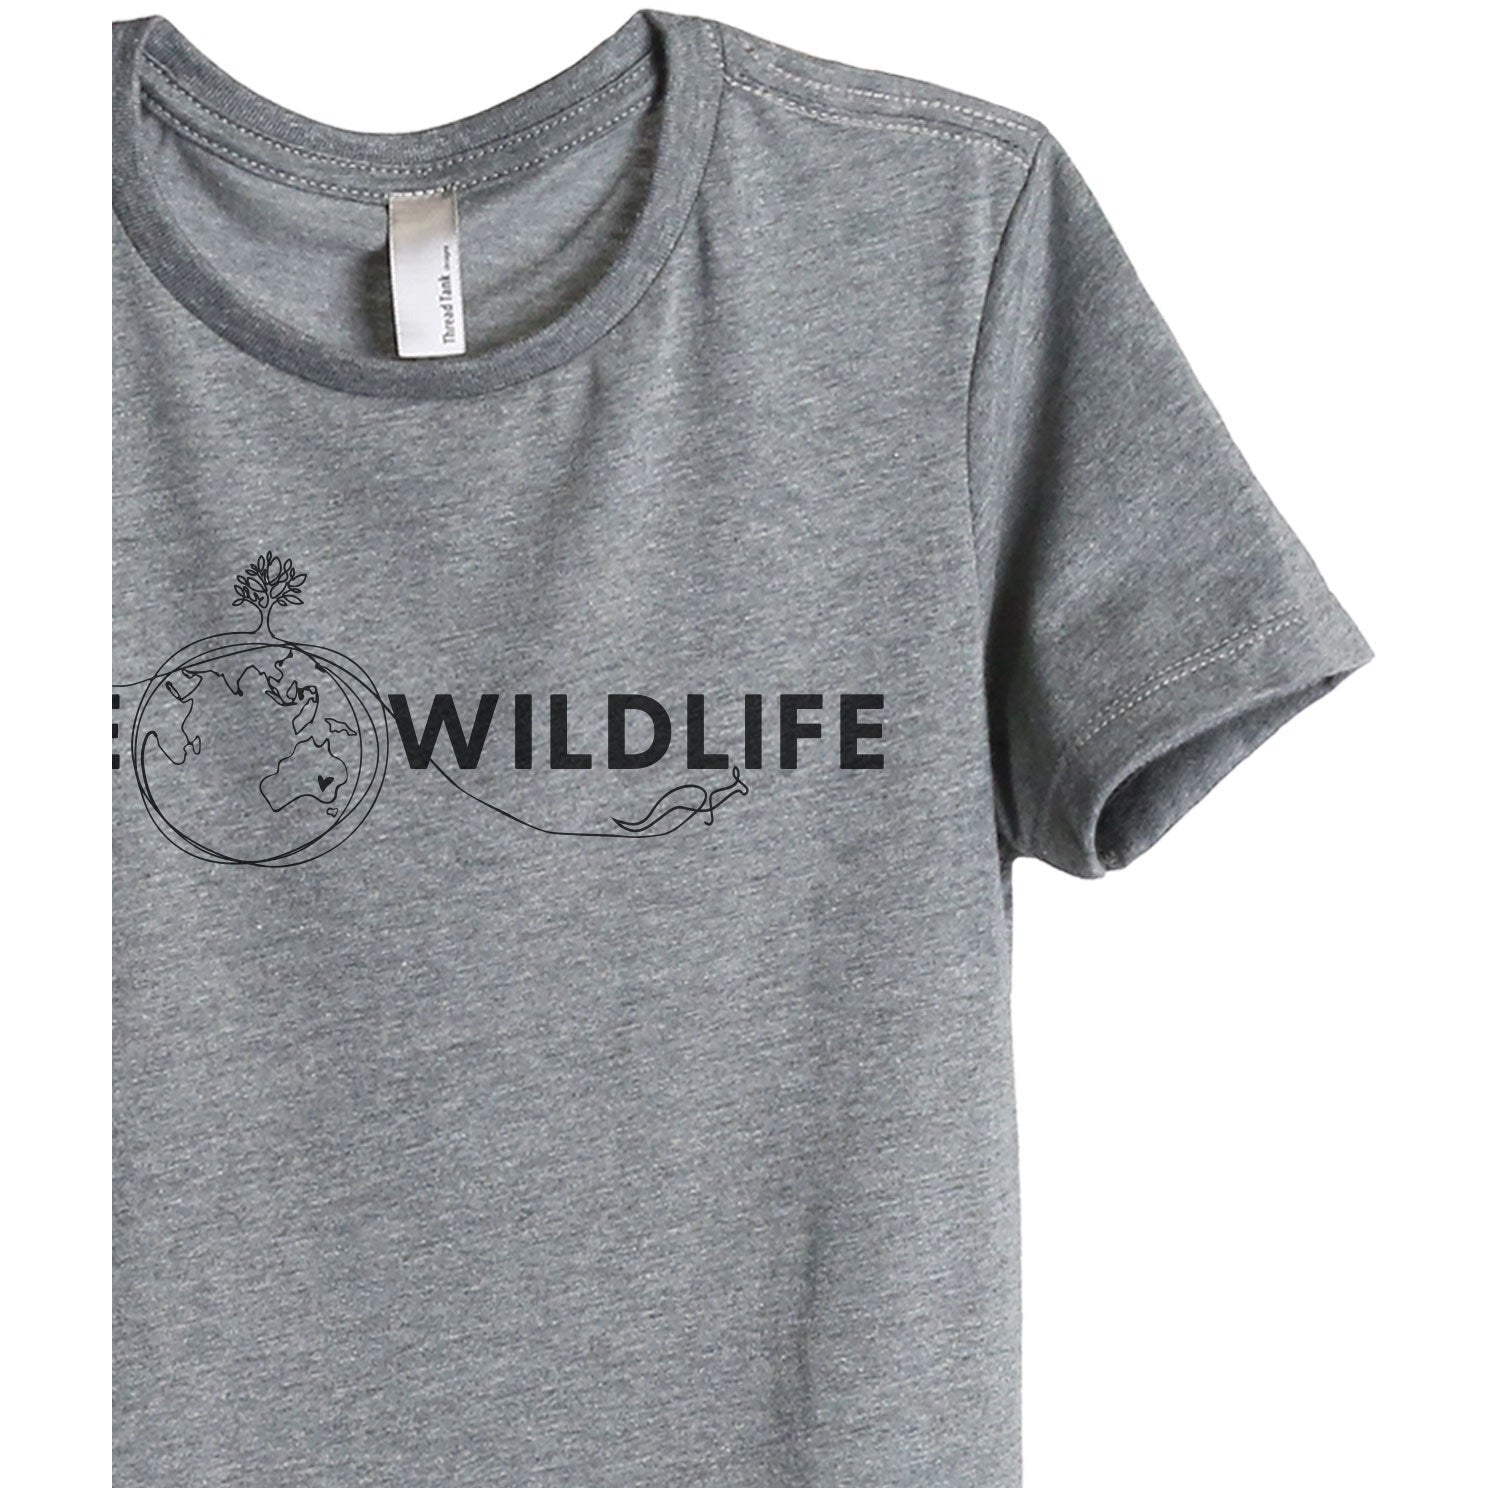 Save Wildlife - Stories You Can Wear